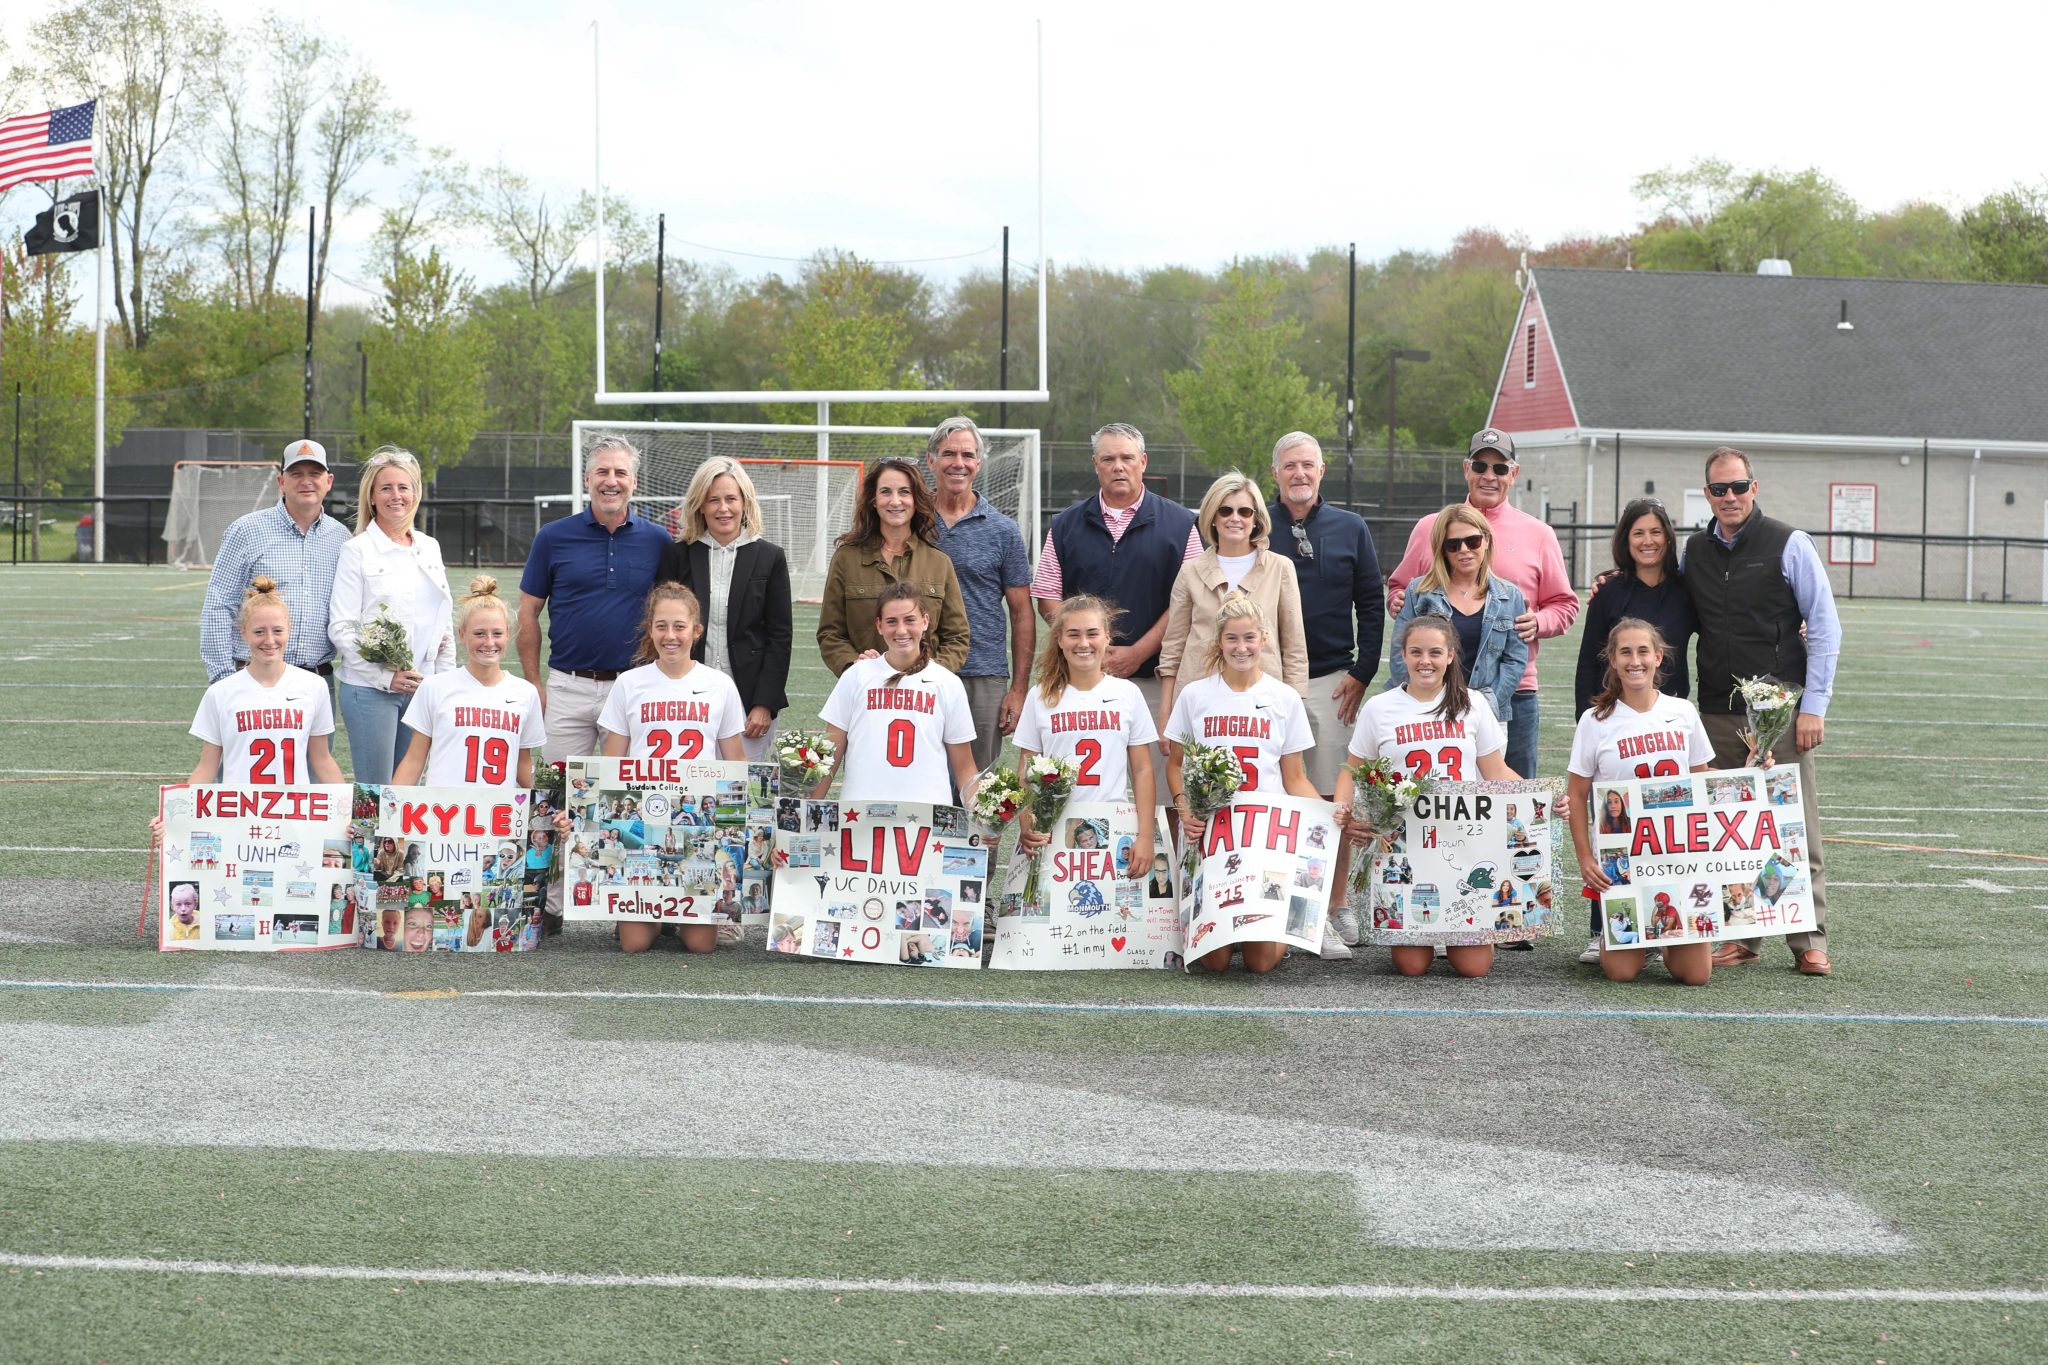 Congrats to the 8 seniors and their parents on a great high school career.